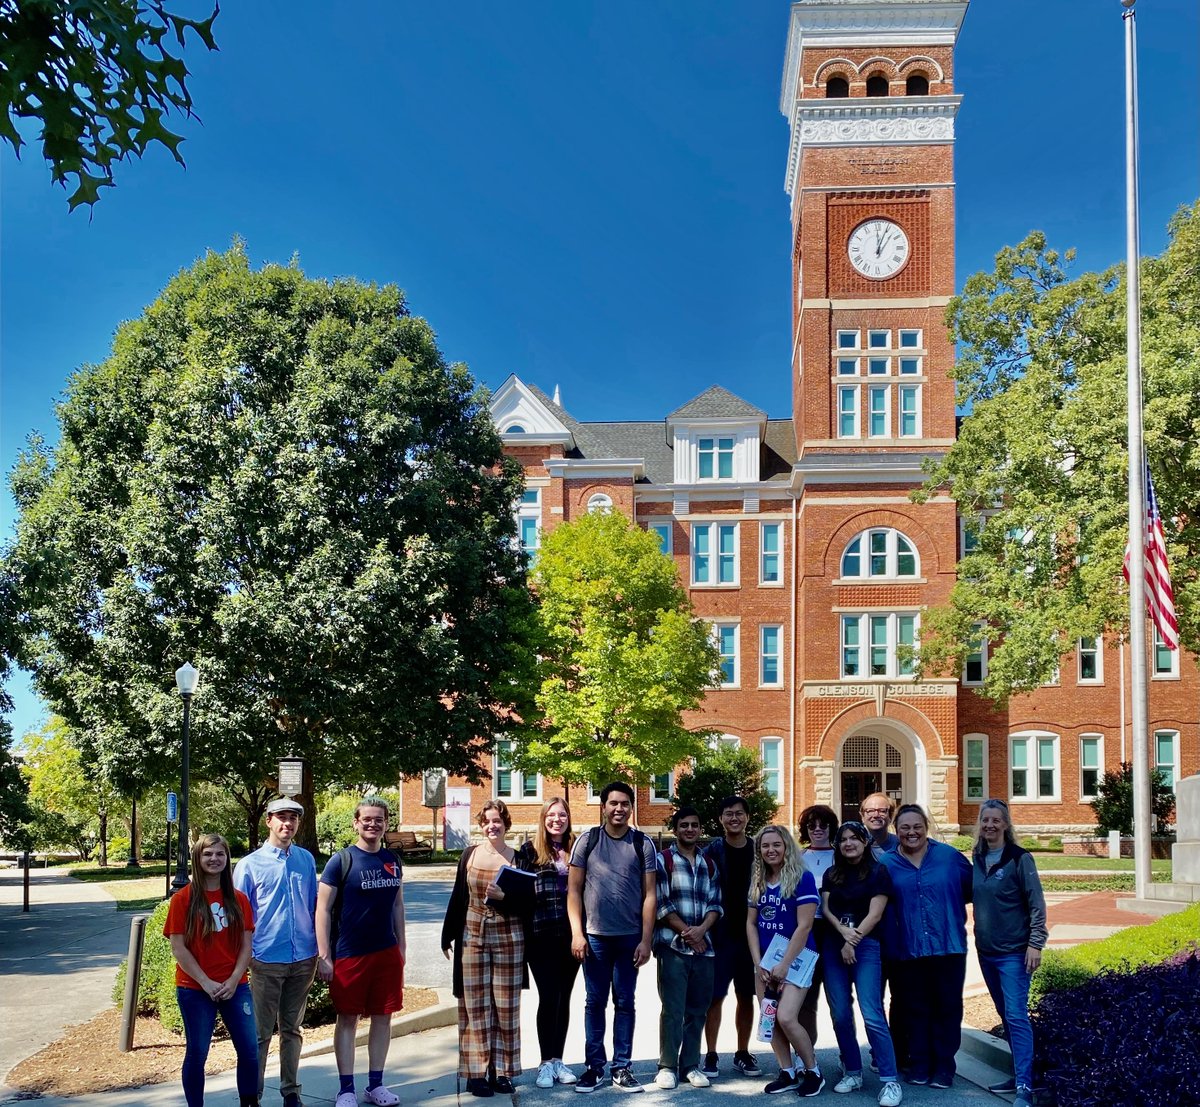 This past Saturday, Clemson Carillonneurs hosted Dr. Laura Ellis and ten carillon students from the University of Florida for an afternoon of performance and pizza.